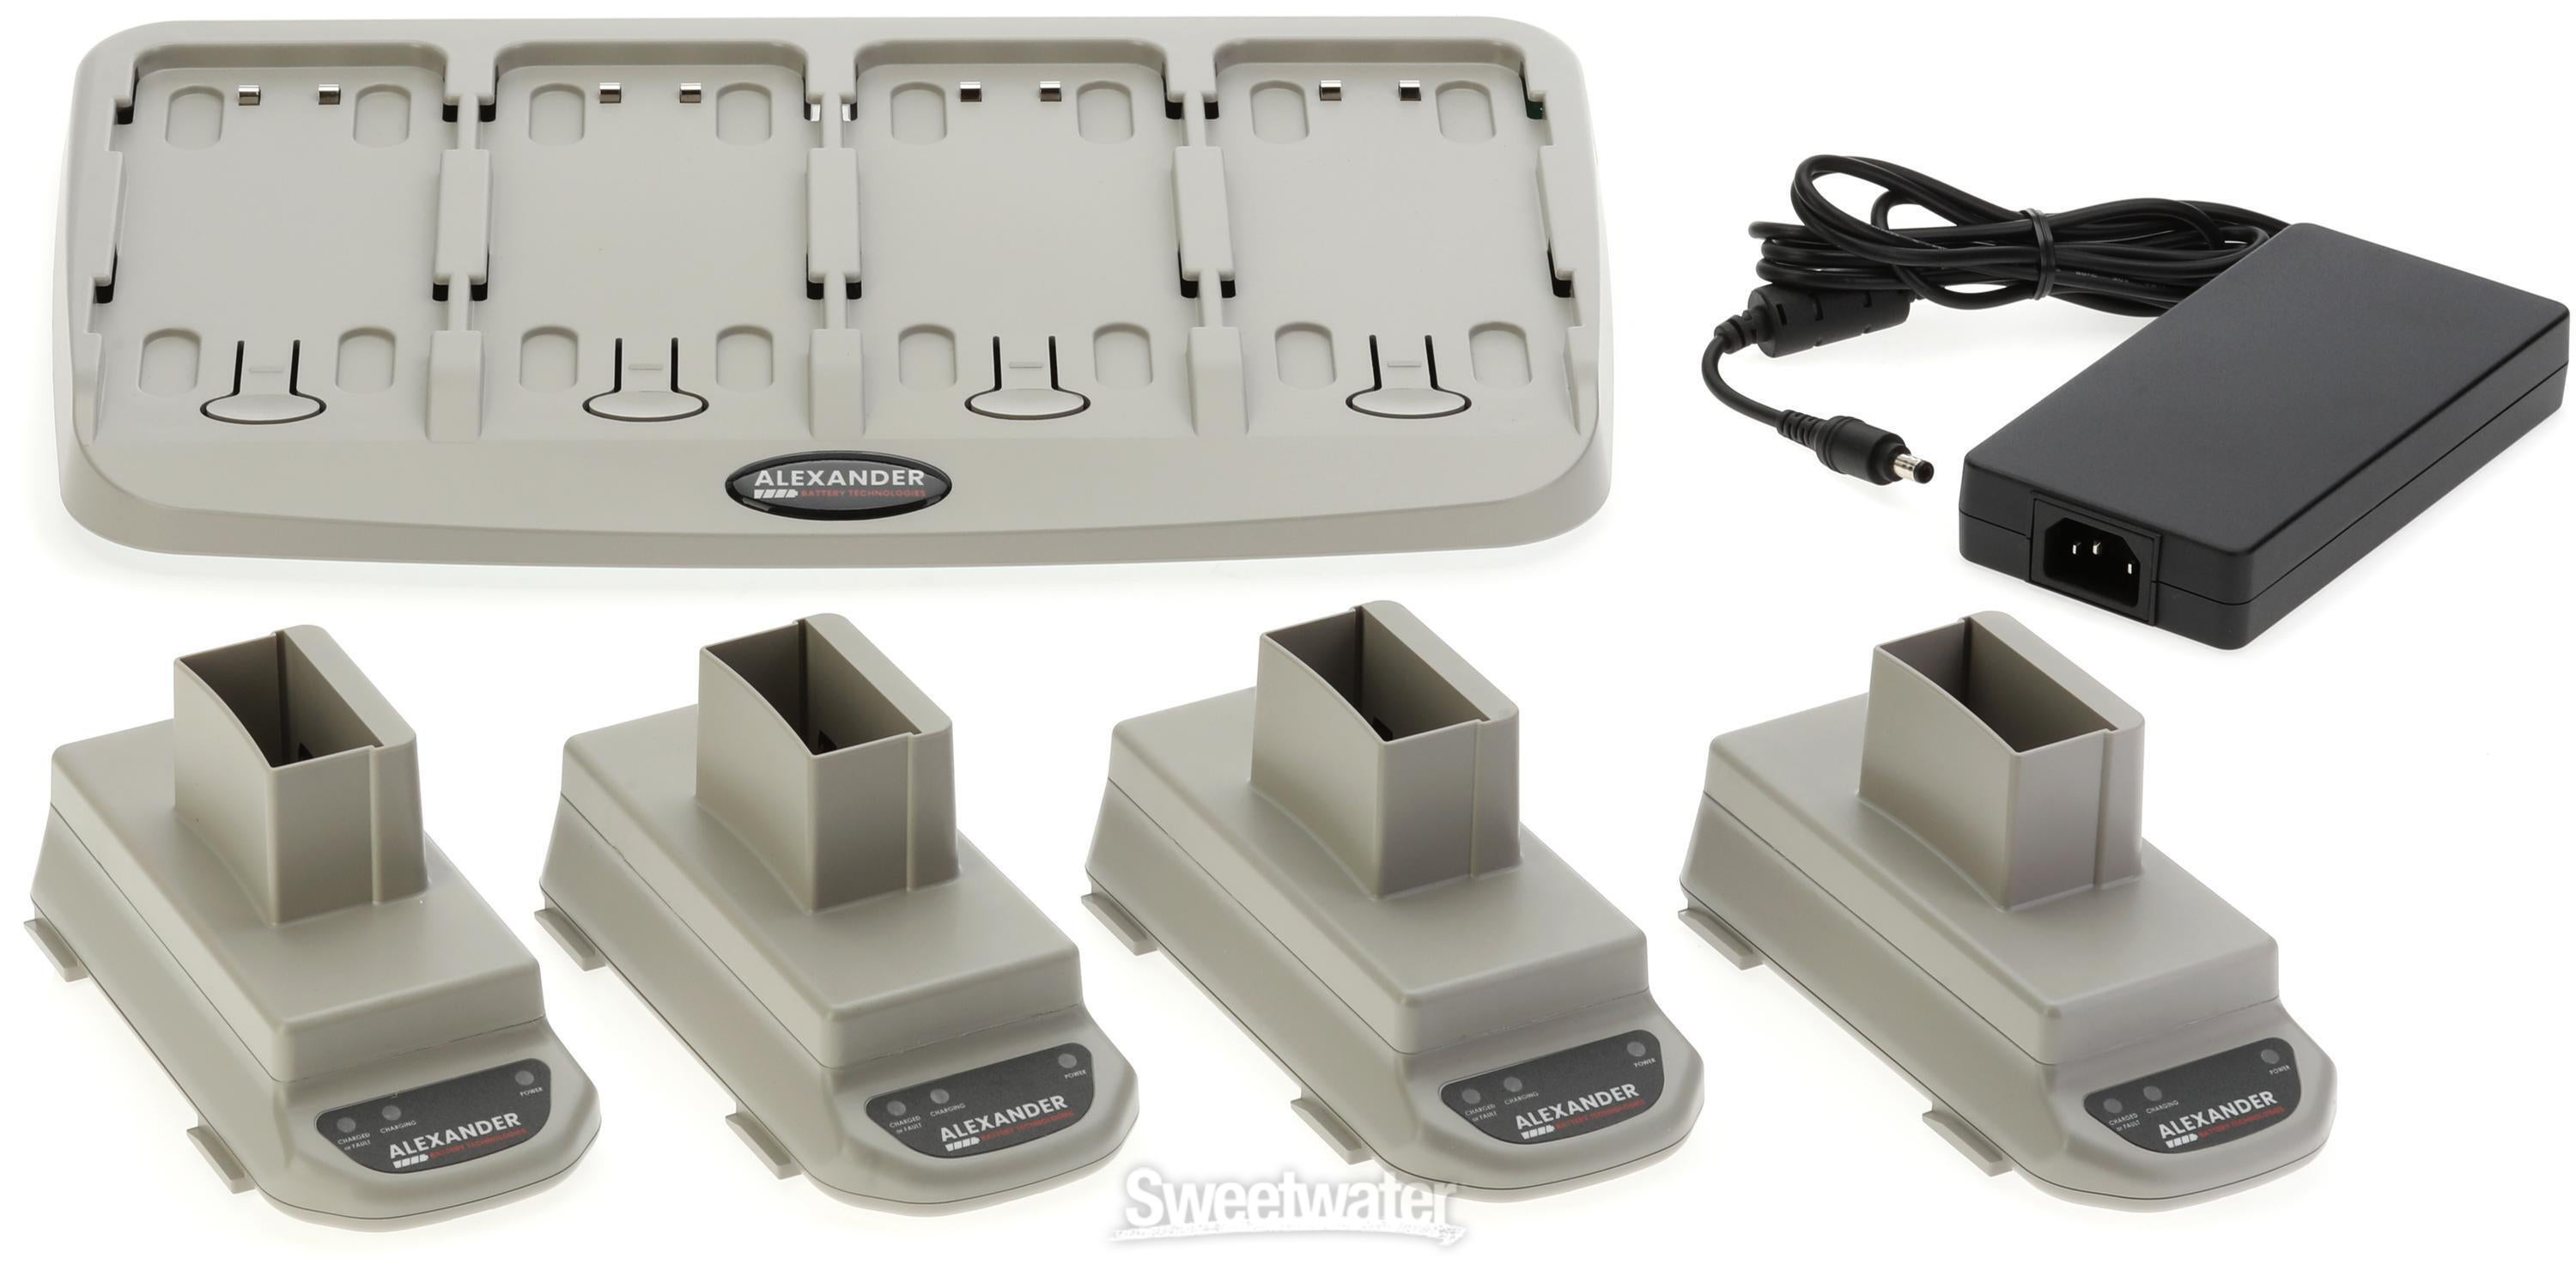 RTS CHG-1800 4-bay Battery Charger for BP-240 Batteries | Sweetwater